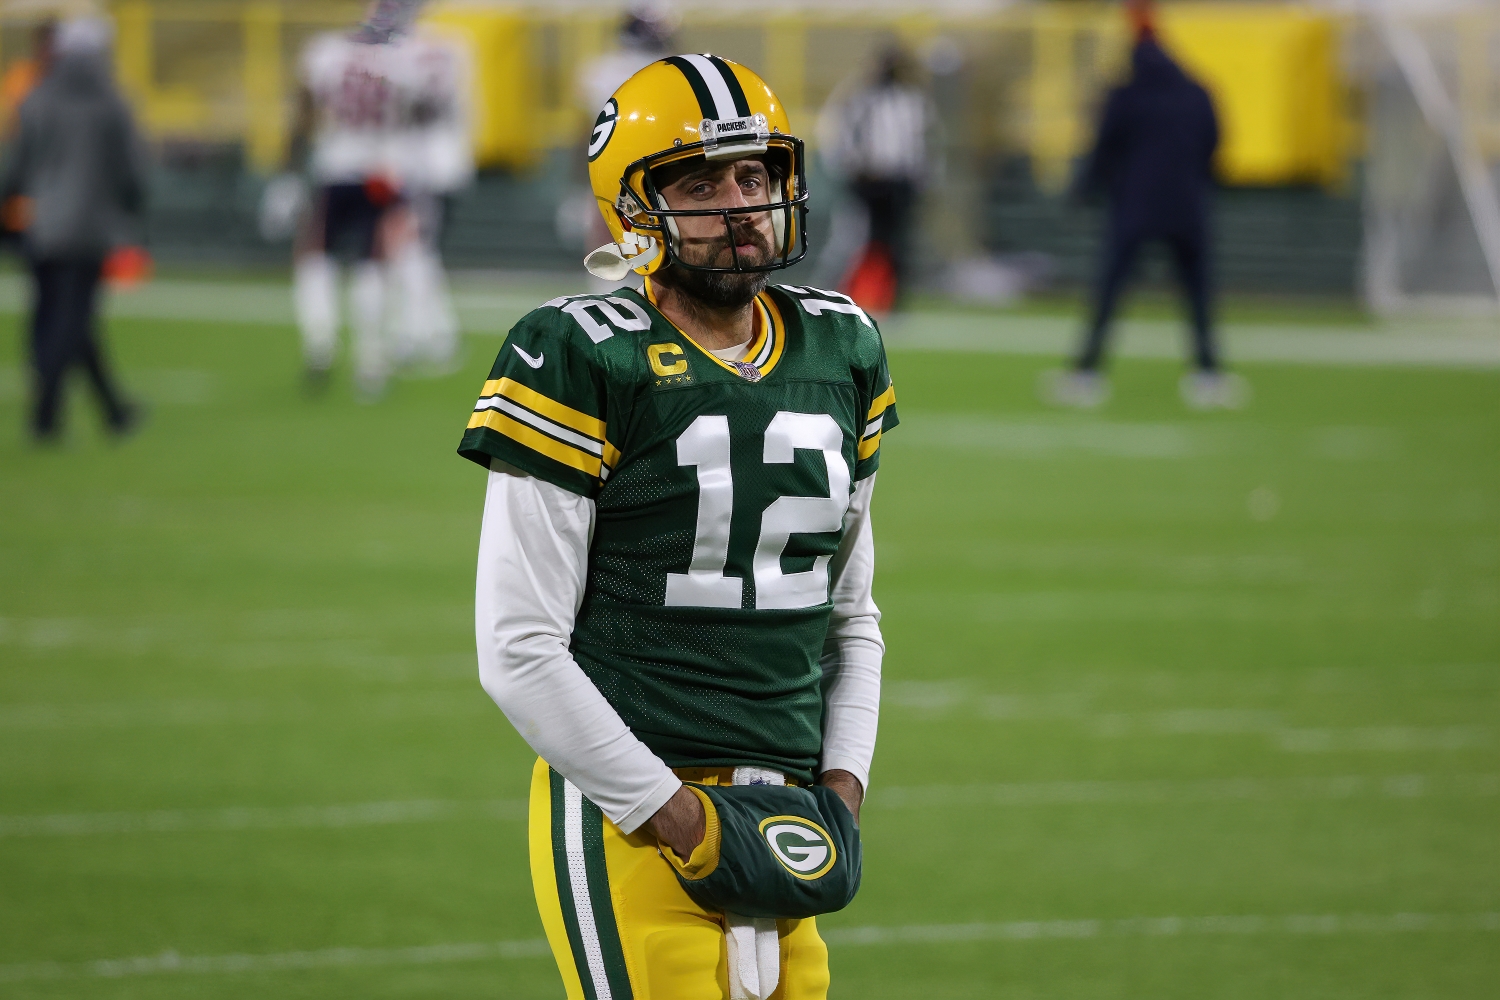 Green Bay Packers quarterback Aaron Rodgers warms up before a game.